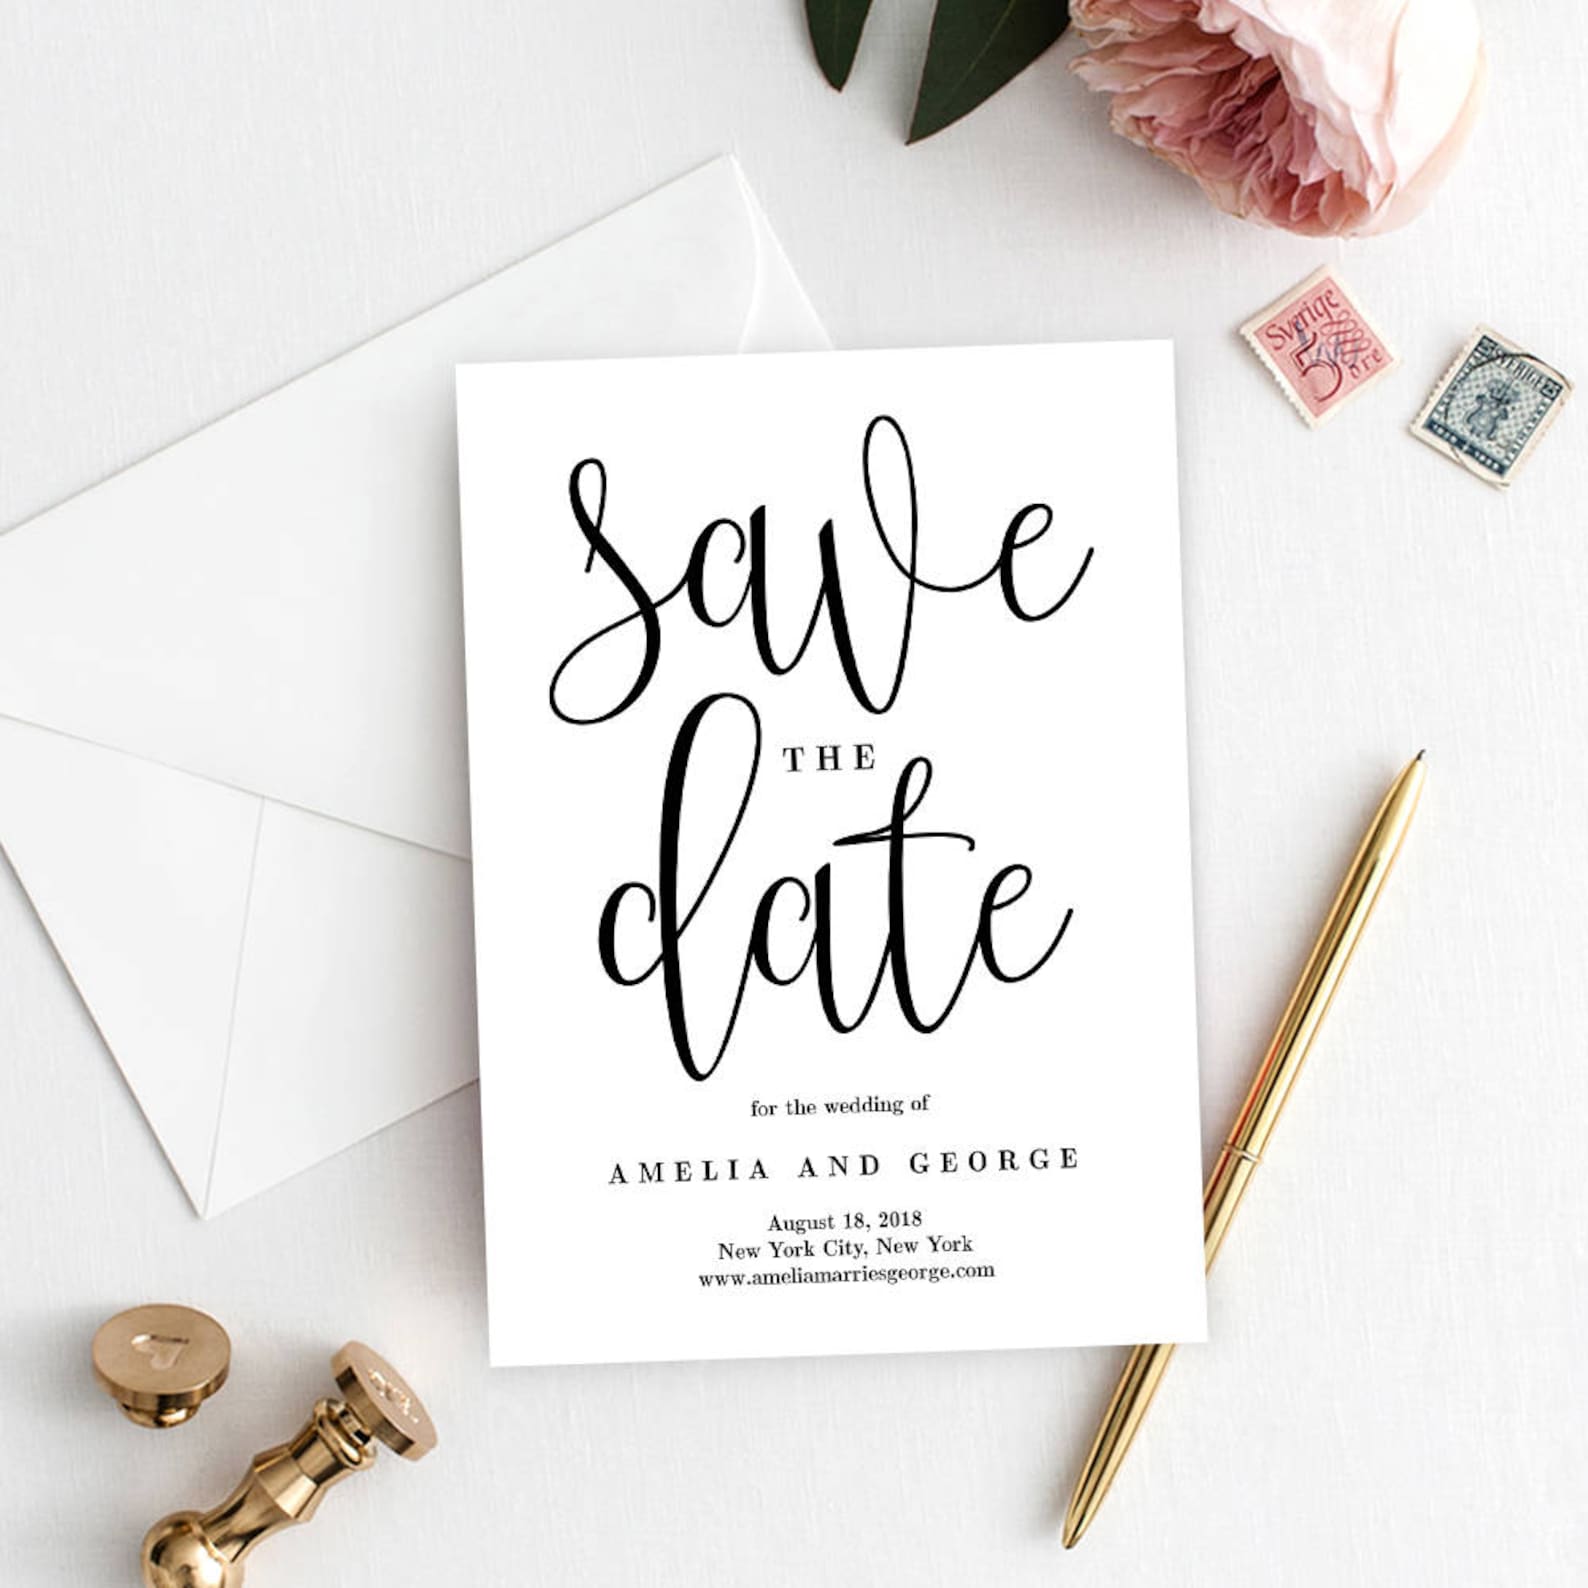 Modern Save the Date Template Wedding Save the Date Card | Etsy